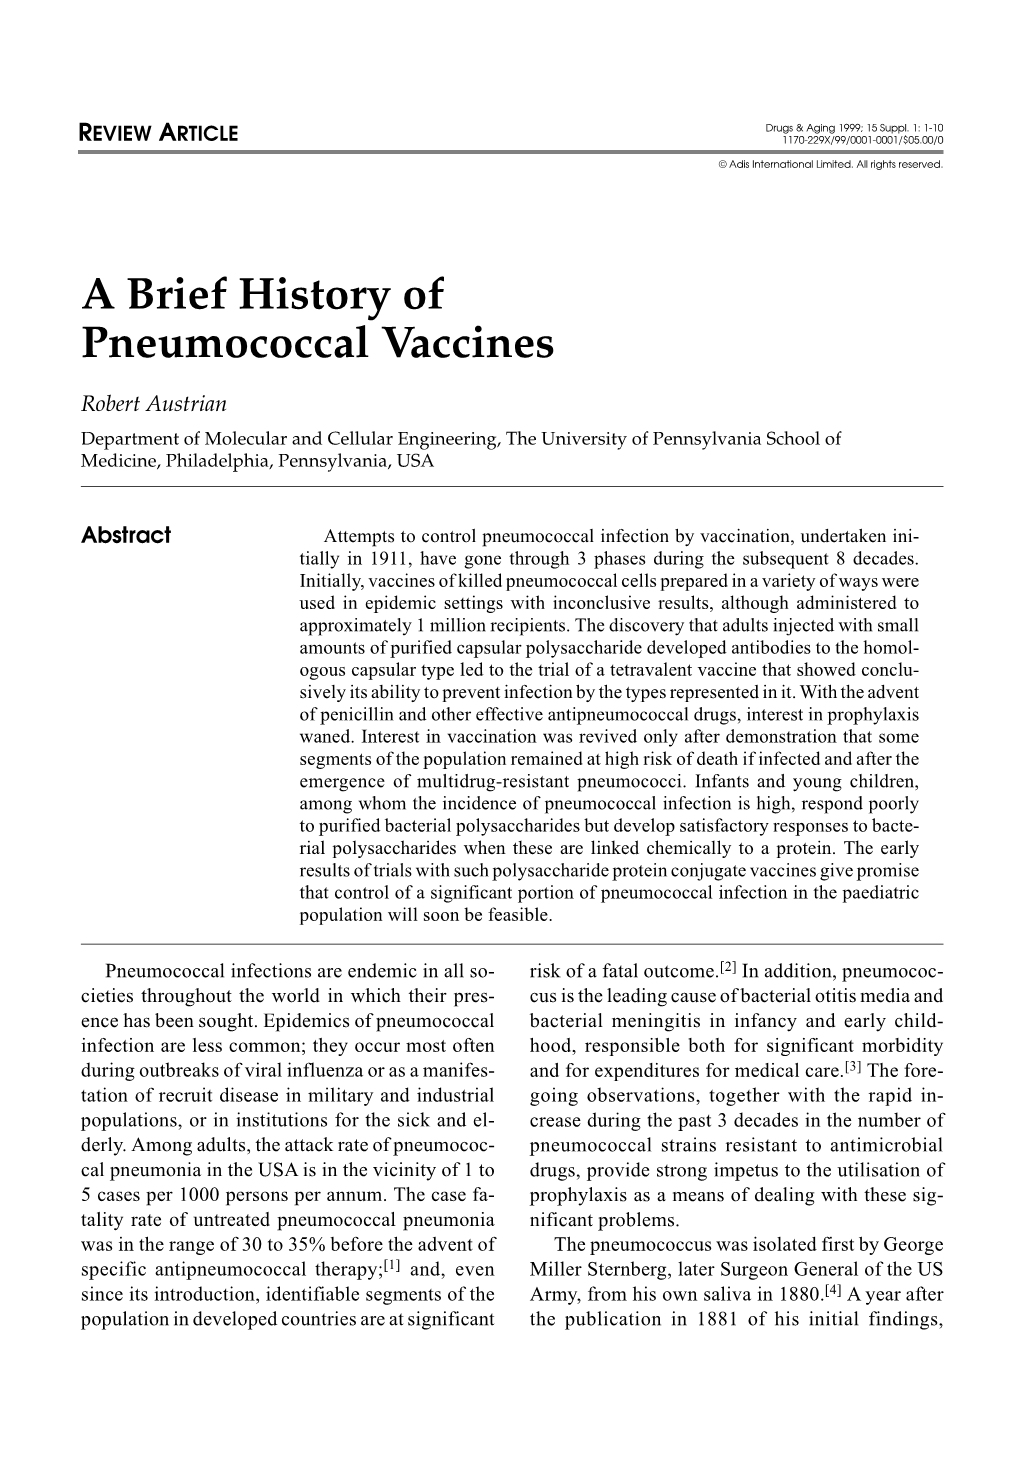 A Brief History of Pneumococcal Vaccines